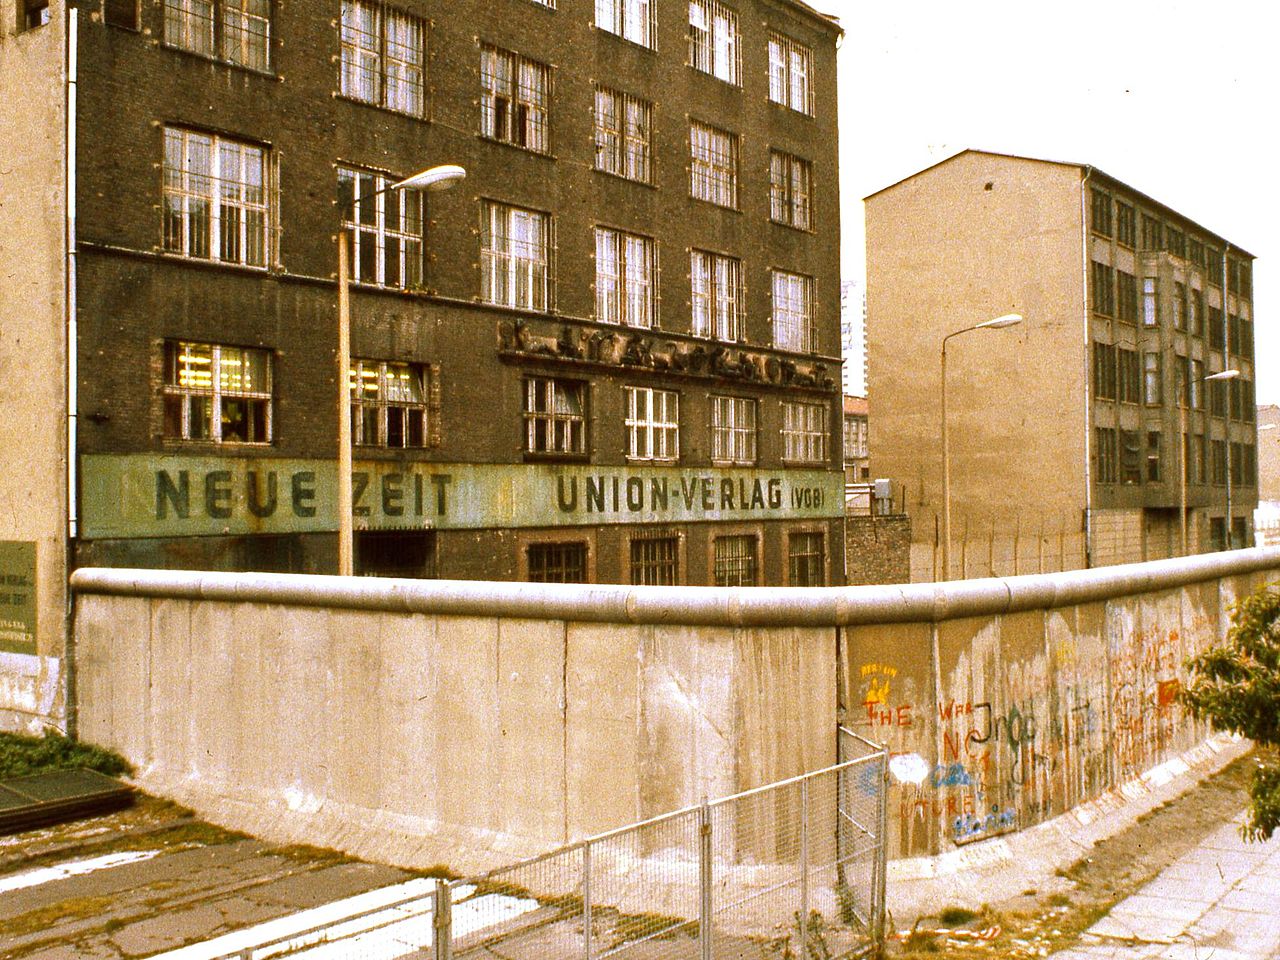 Exterior of East Berlin Neue Zeit newspaper building (from the rear), with Berlin Wall in foreground, 1984. Other information Photo by George Garrigues.